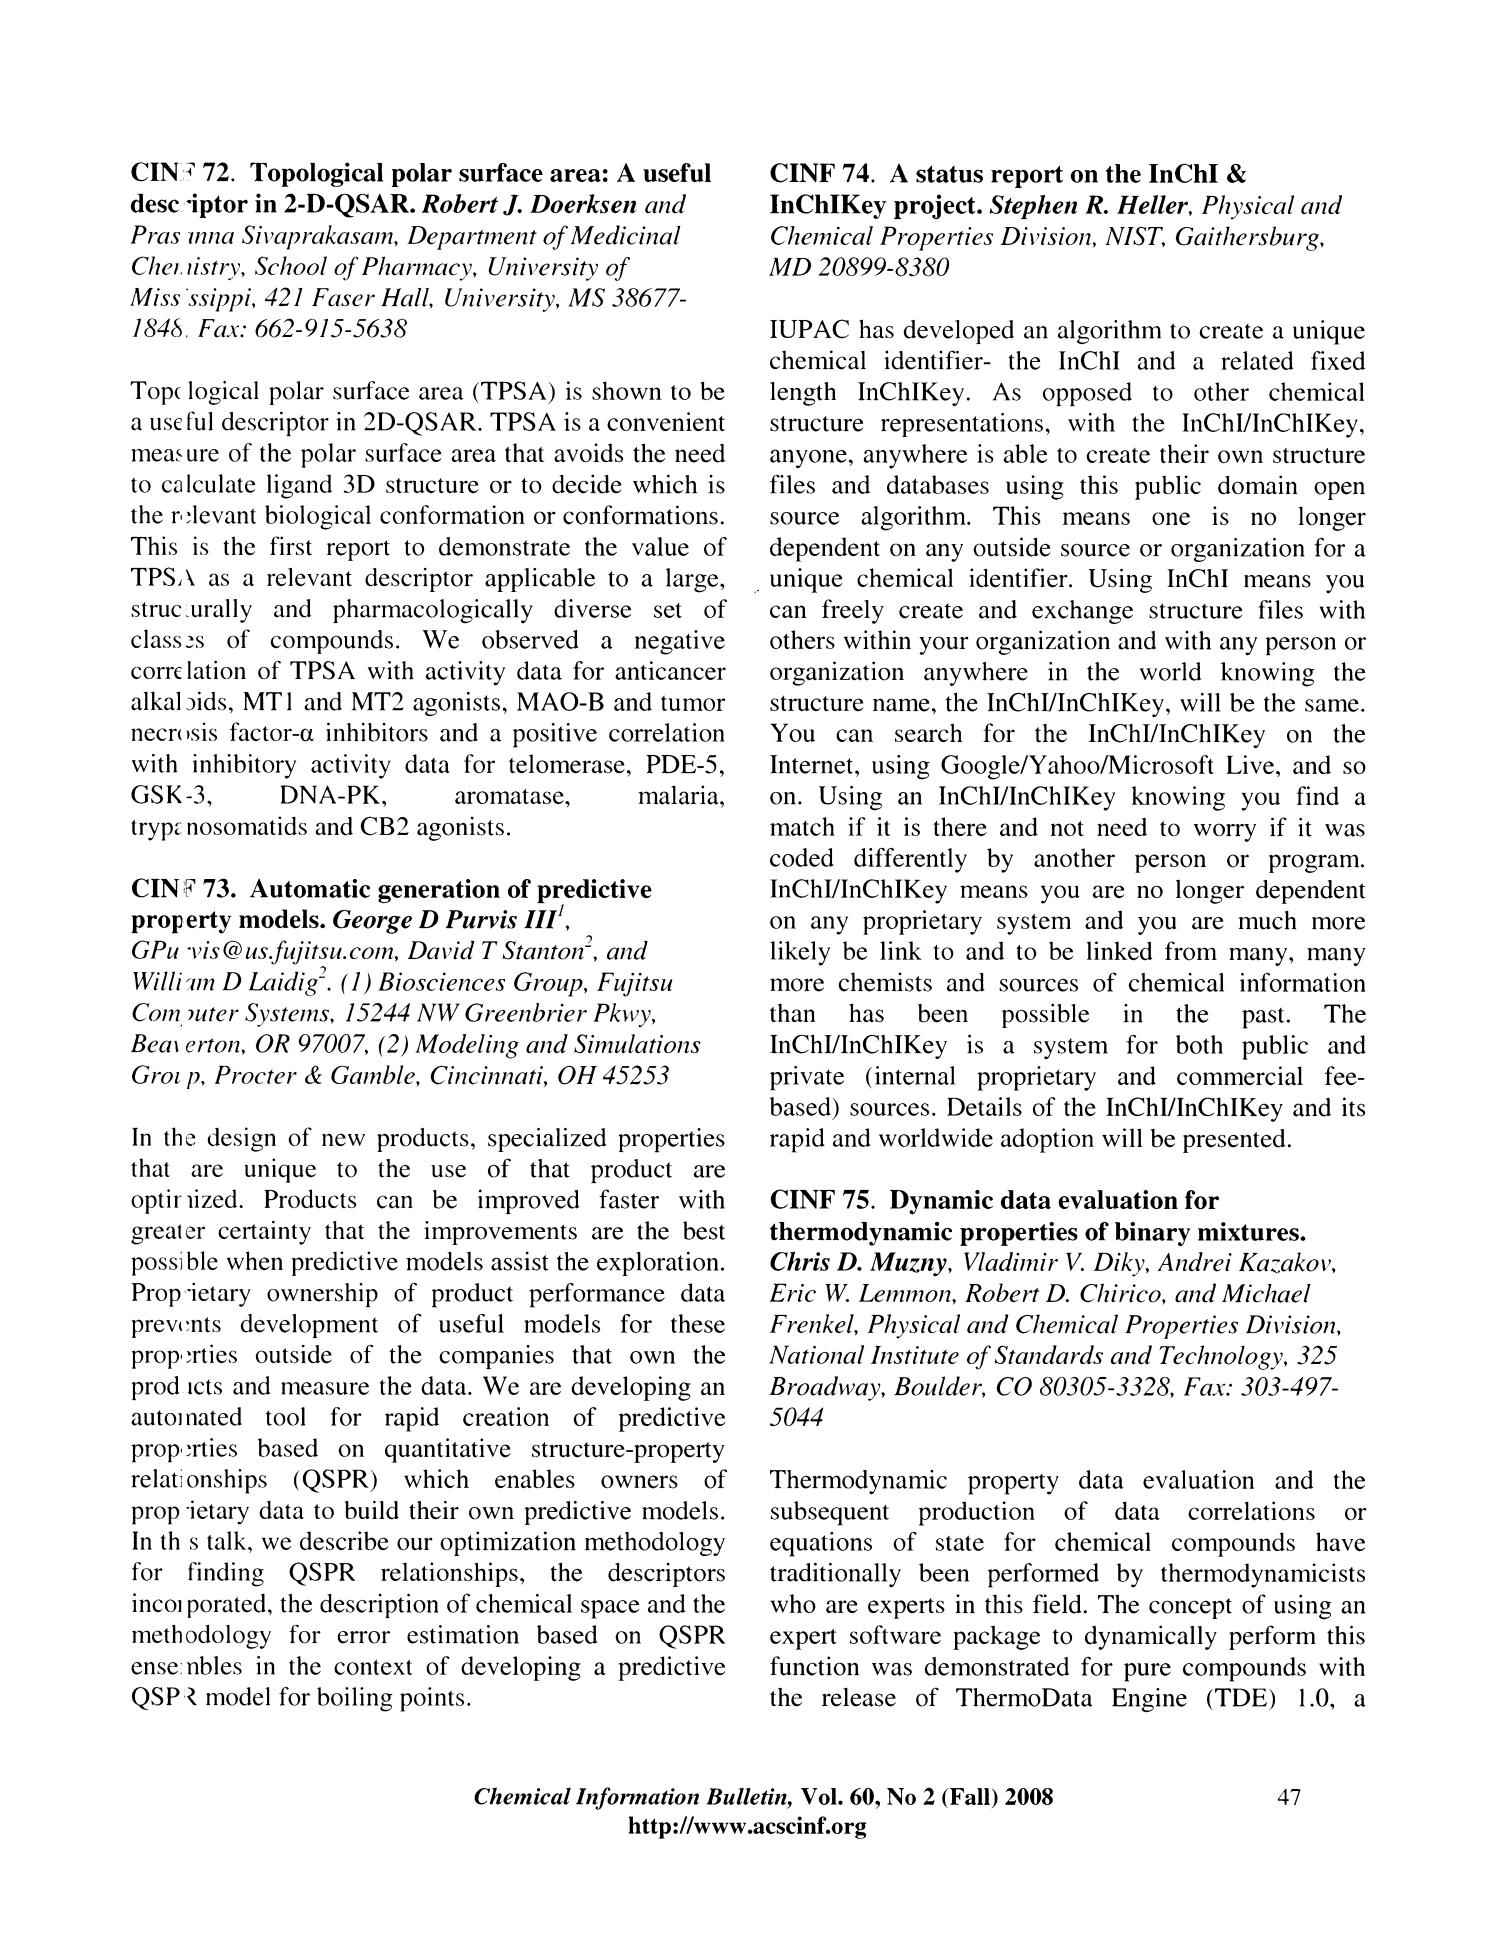 Chemical Information Bulletin, Volume 60, Number 2, Fall 2008
                                                
                                                    [Sequence #]: 49 of 56
                                                